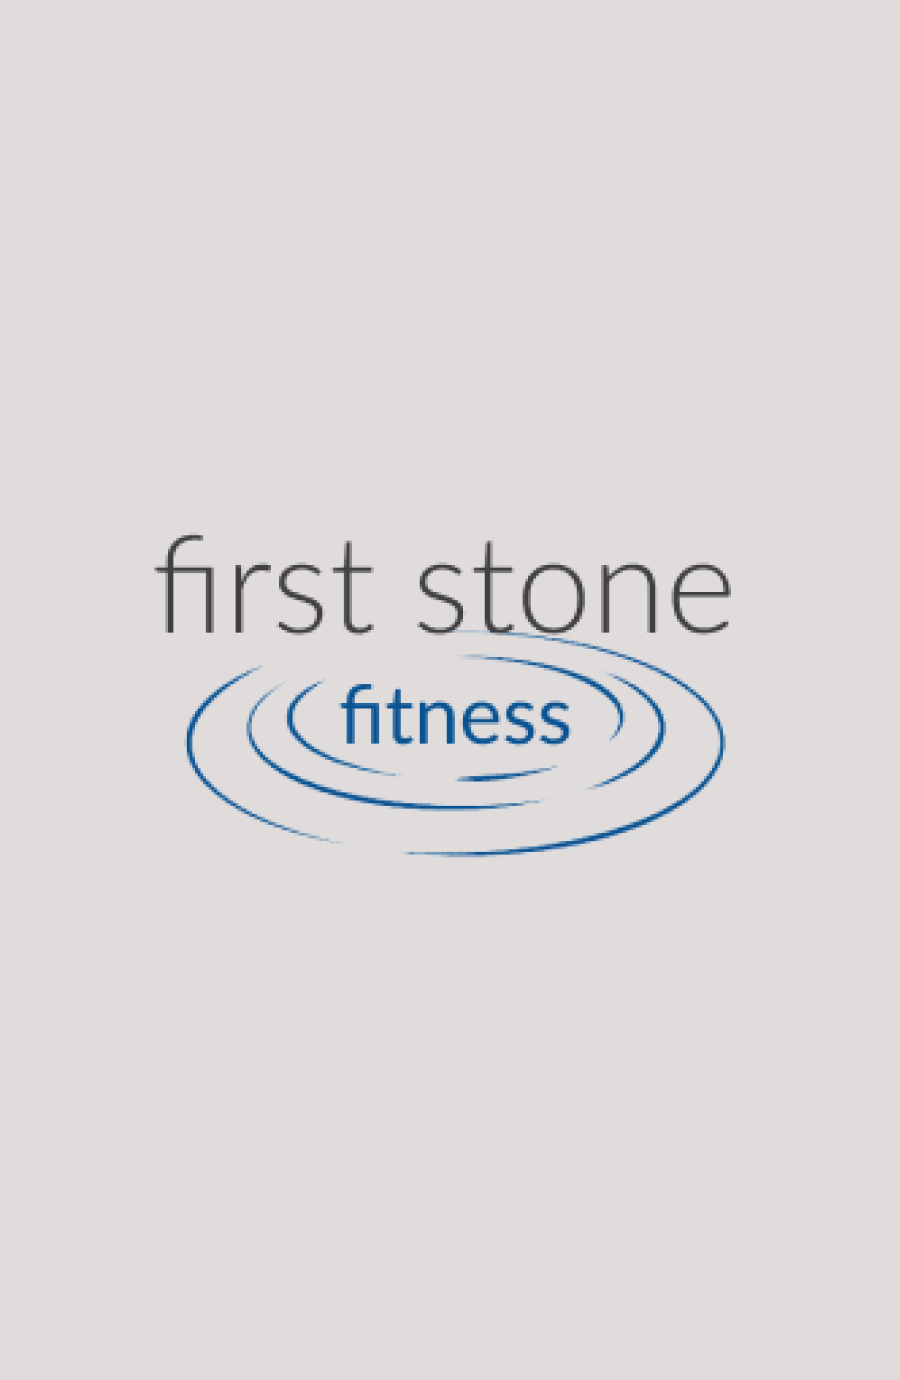 Building a Local Fitness Business